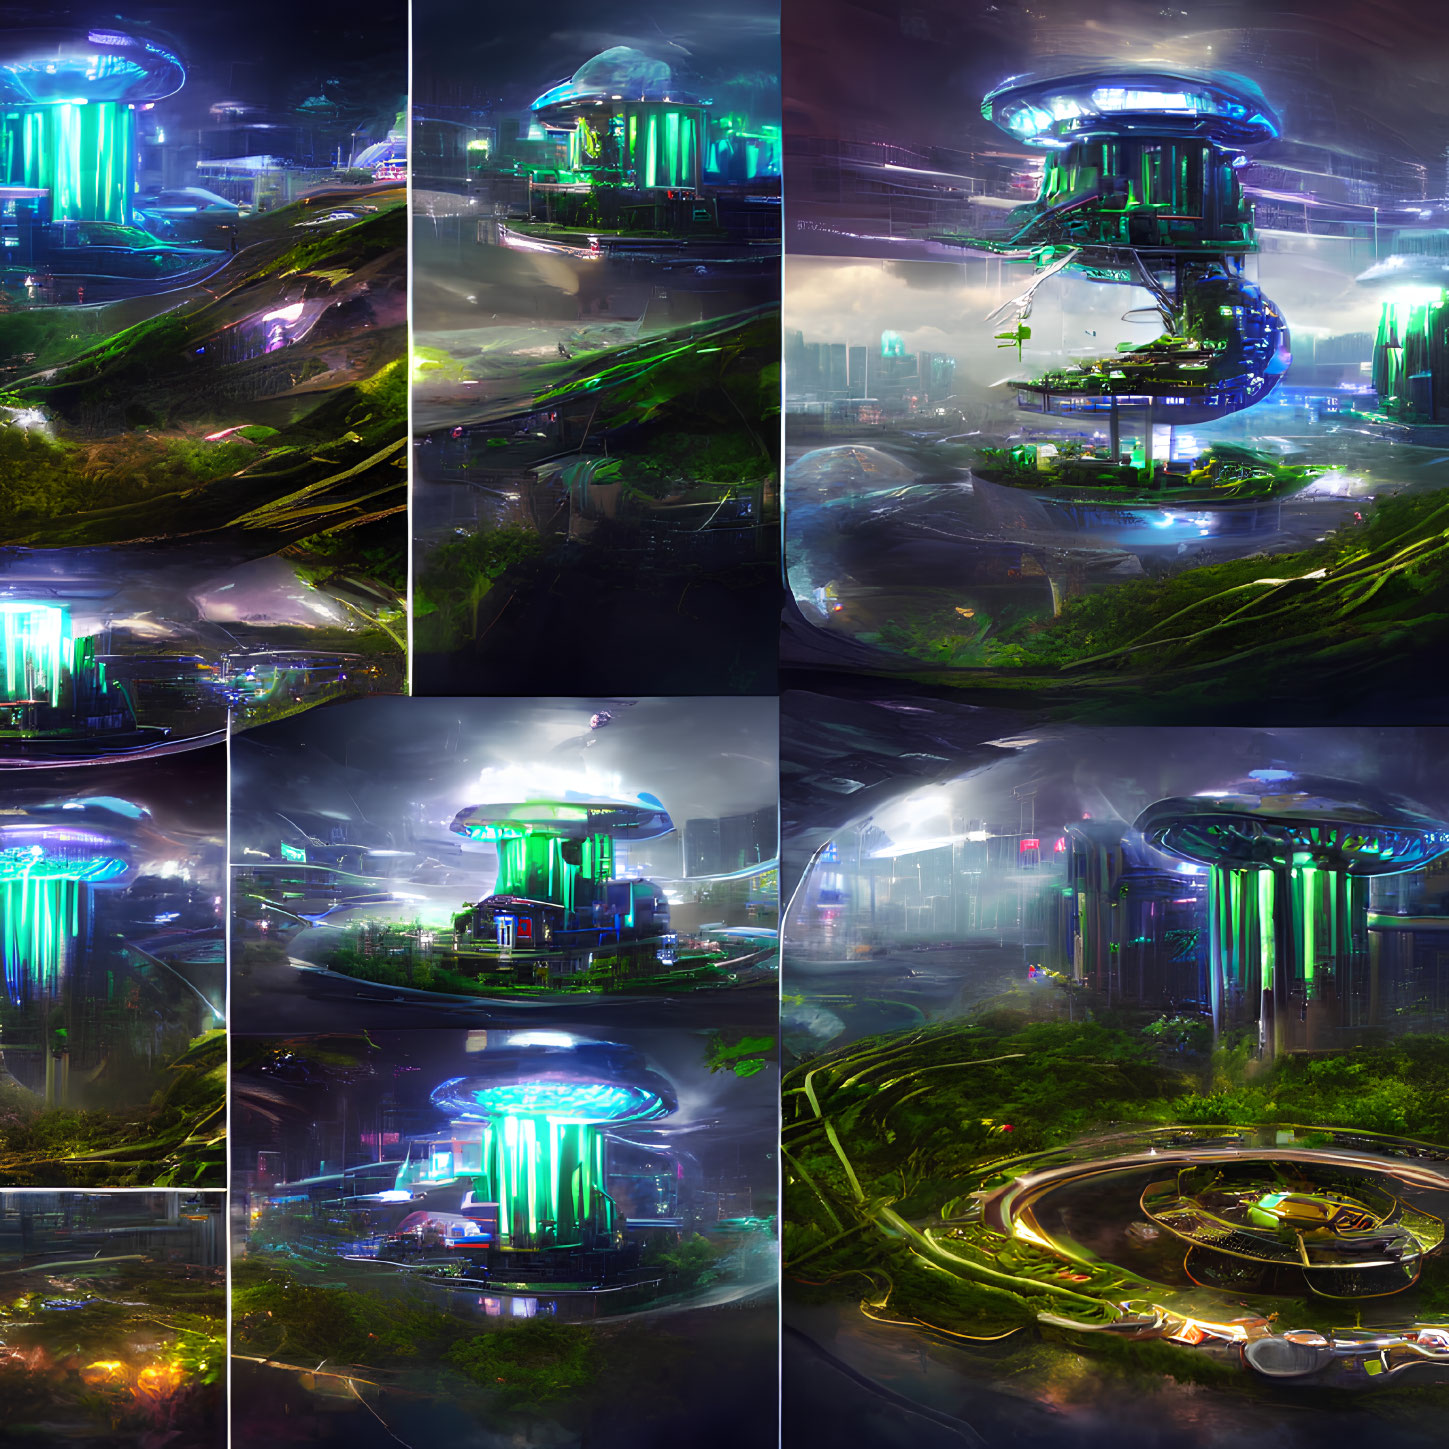 Futuristic cityscape collage with neon-lit structures and greenery